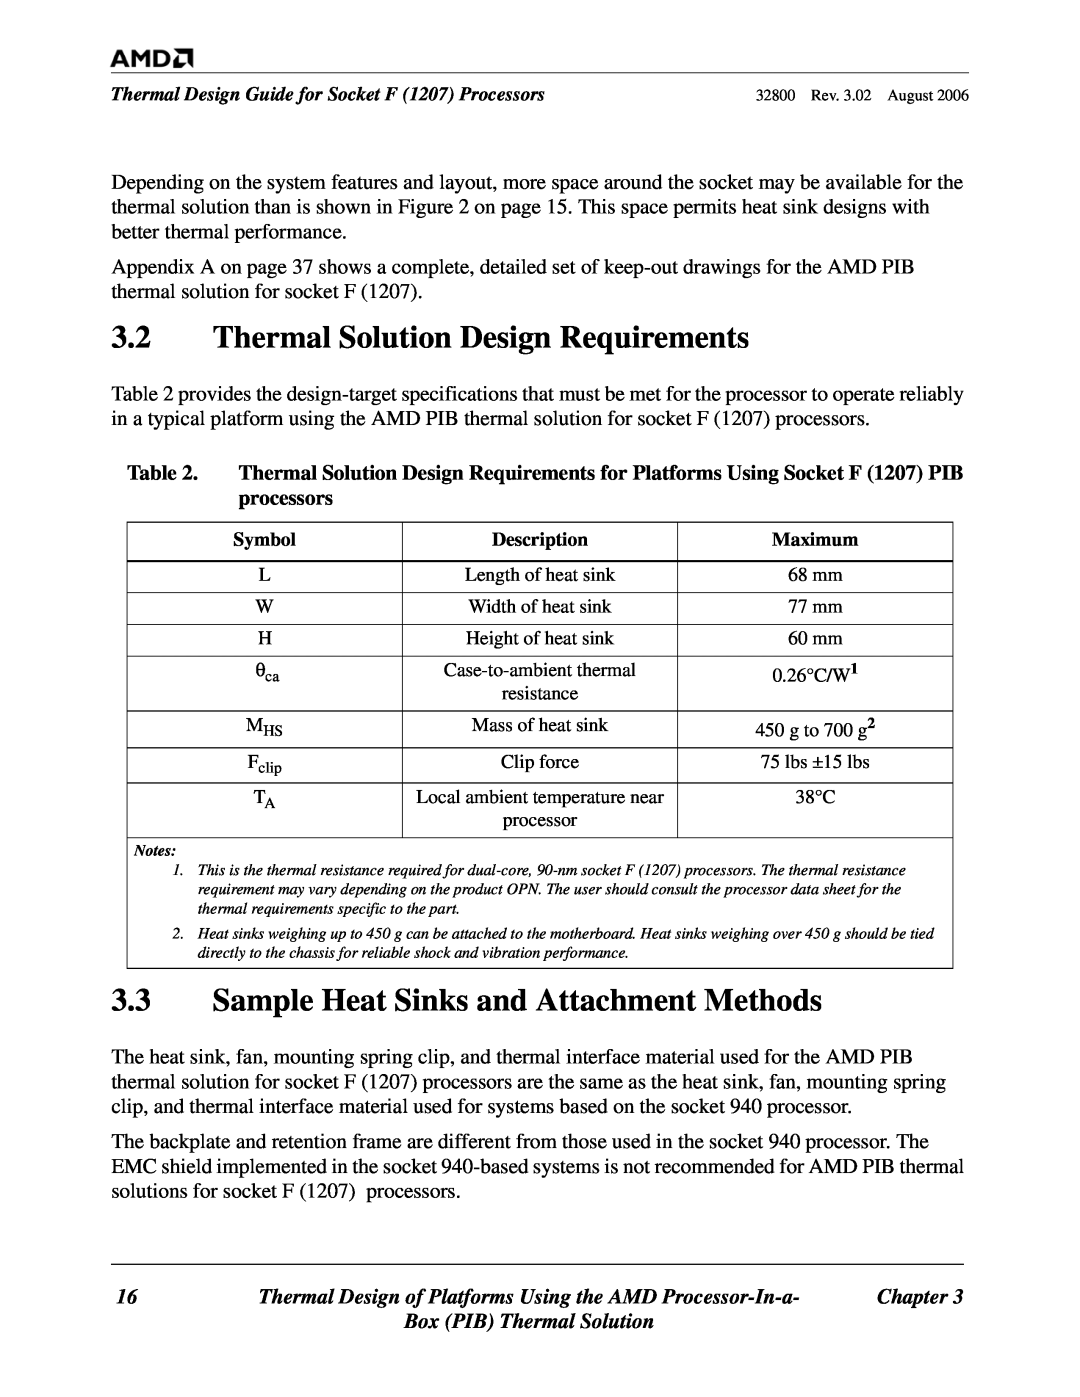 AMD 1207 manual Thermal Solution Design Requirements, Sample Heat Sinks and Attachment Methods 